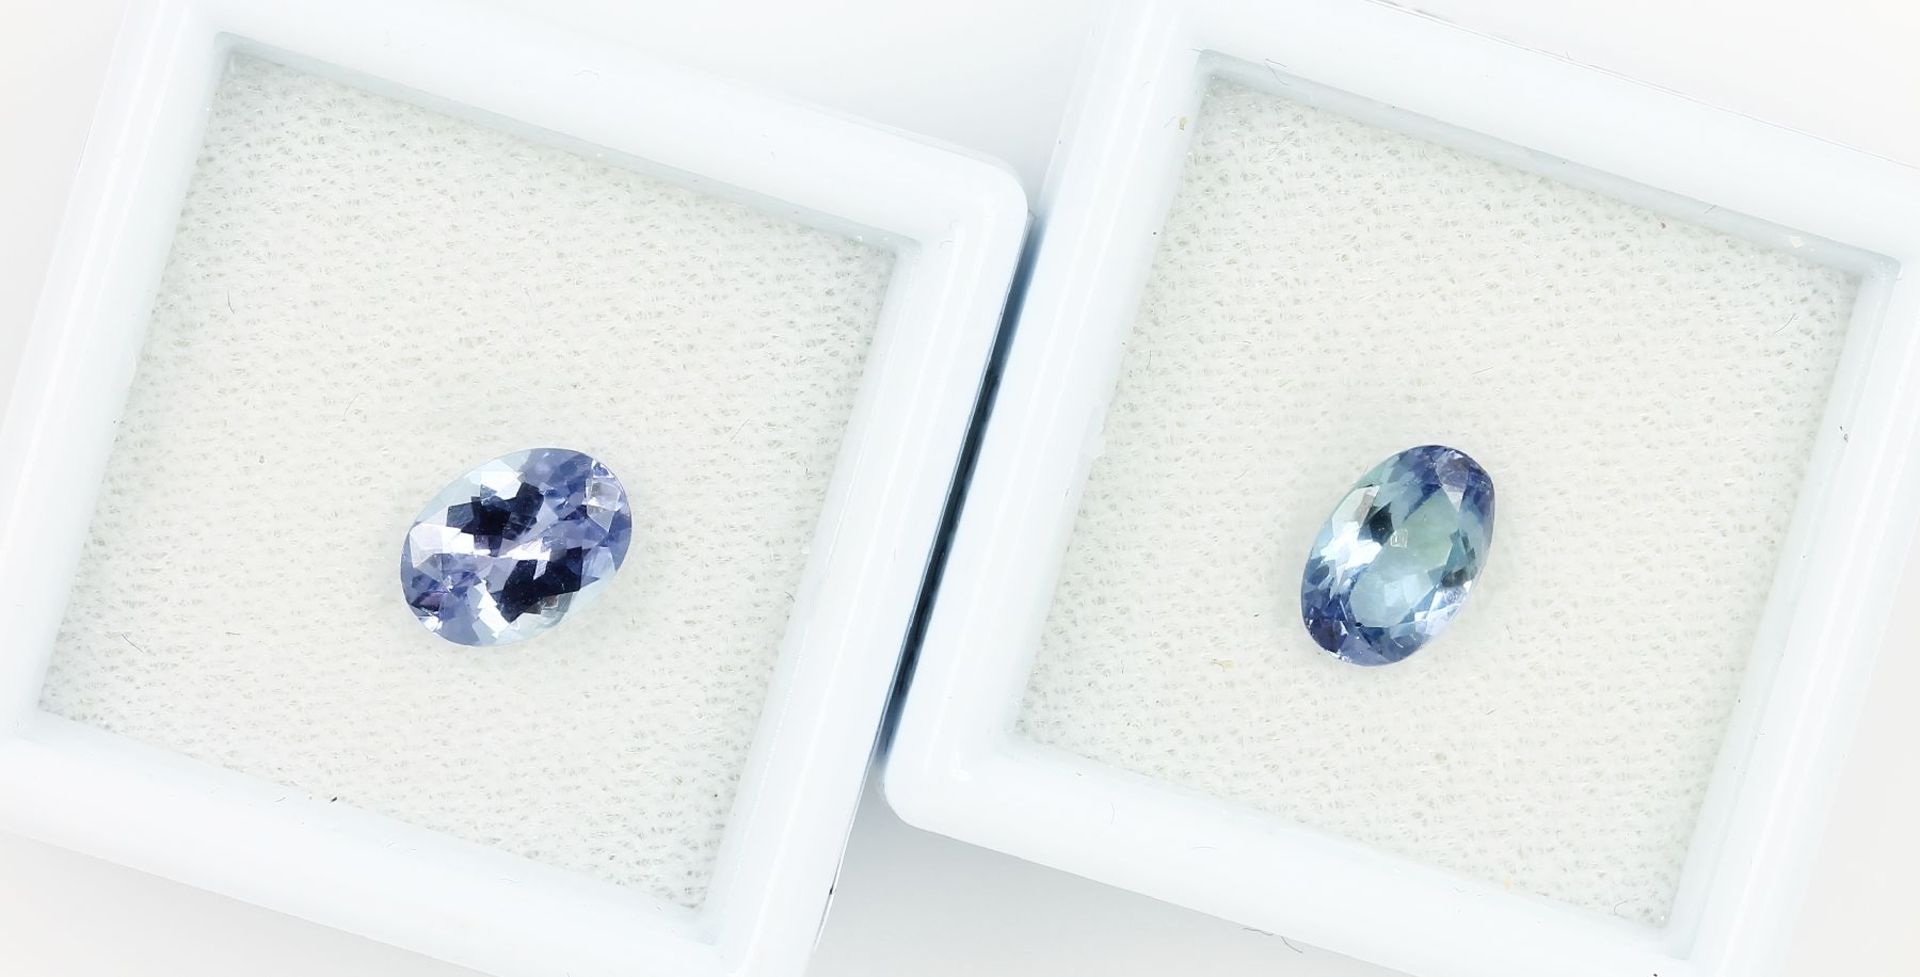 Lot 2 tanzanites , 1 x 1.19 ct, oval bevelled bluish violet (treated), PGTL- expertise; 1 x 1.14 ct,